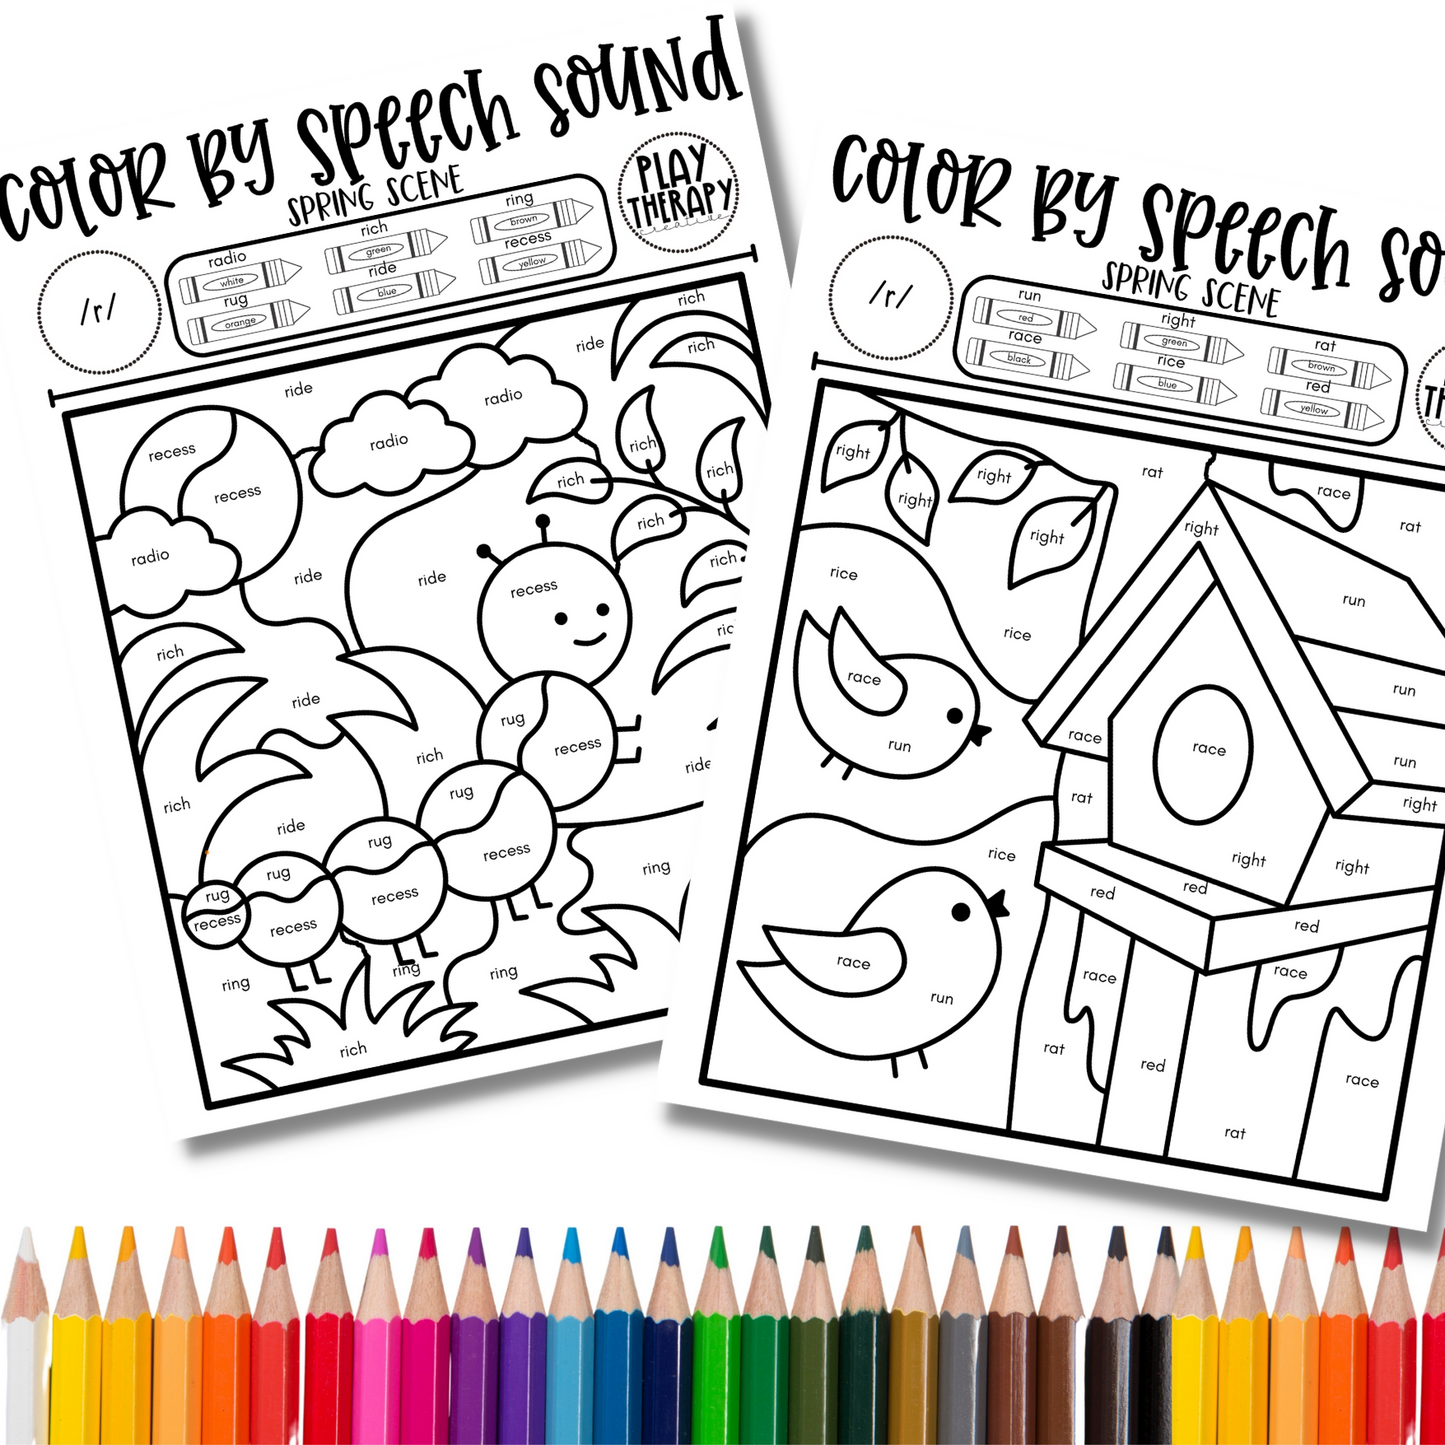 Pre-Vocalic /r/ Sound Spring Themed Color-by-Speech-Sounds for Speech Therapy